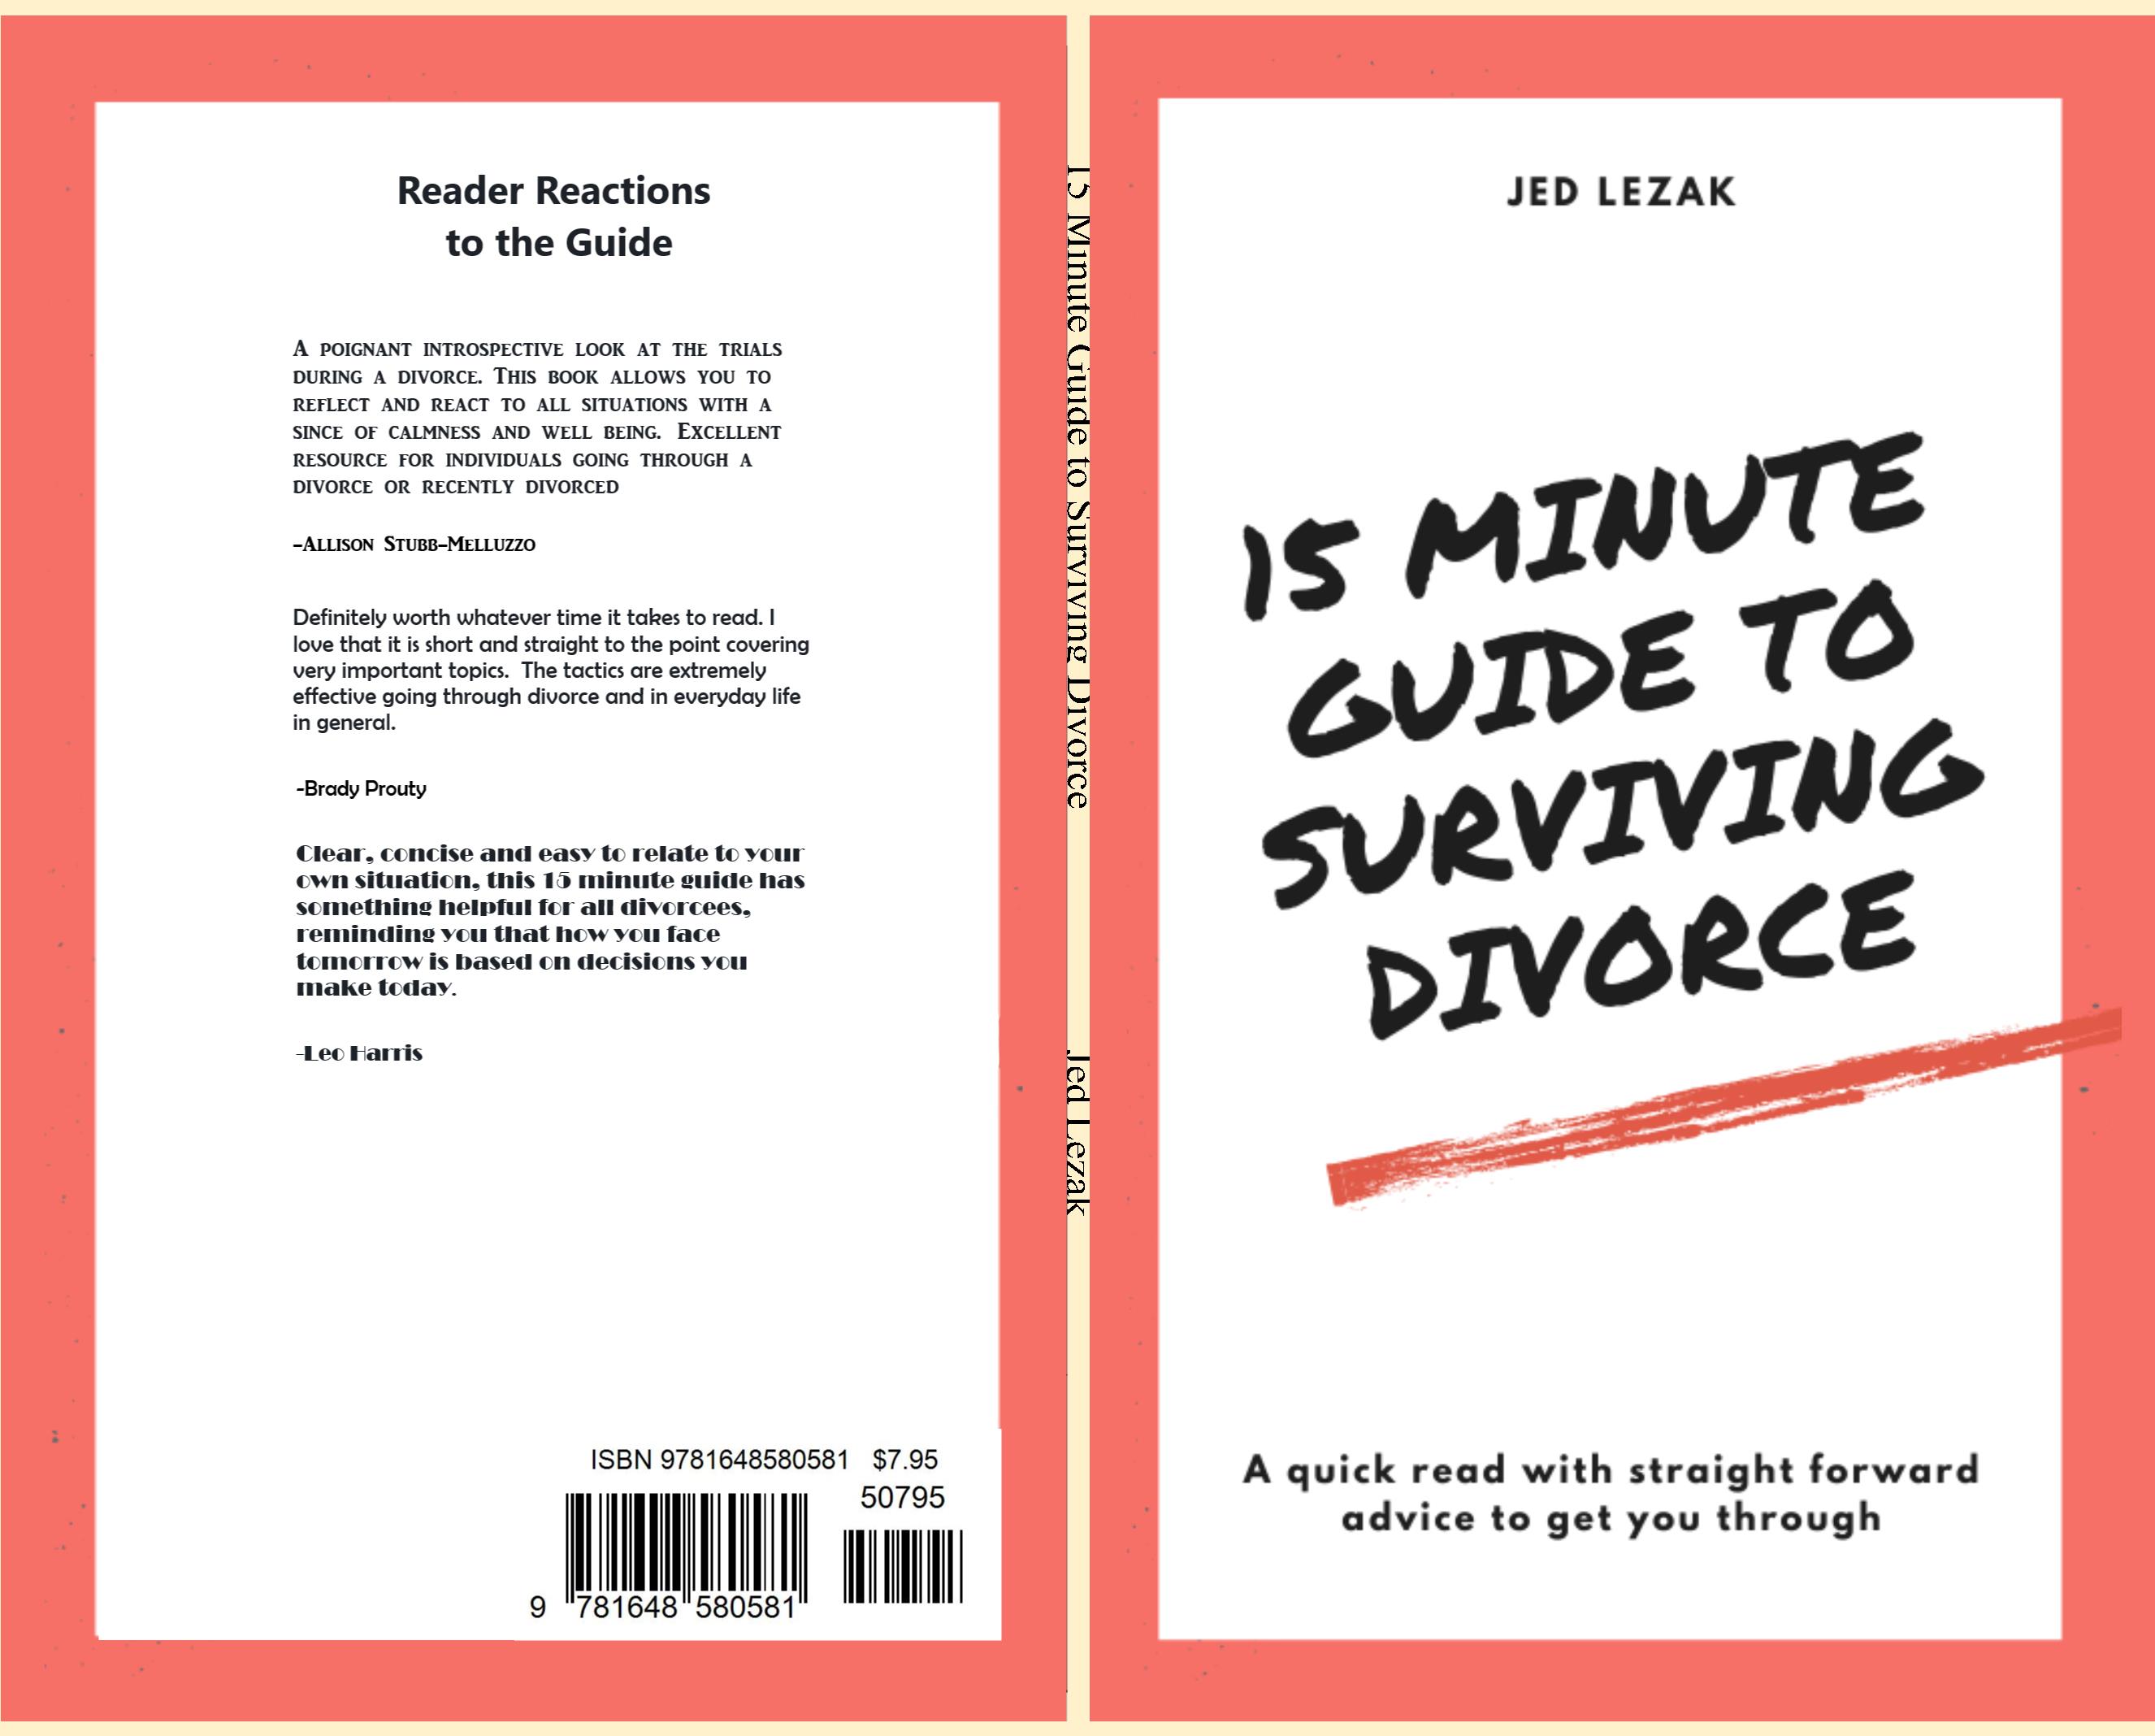 15 Minute Guide to Surviving Divorce cover image